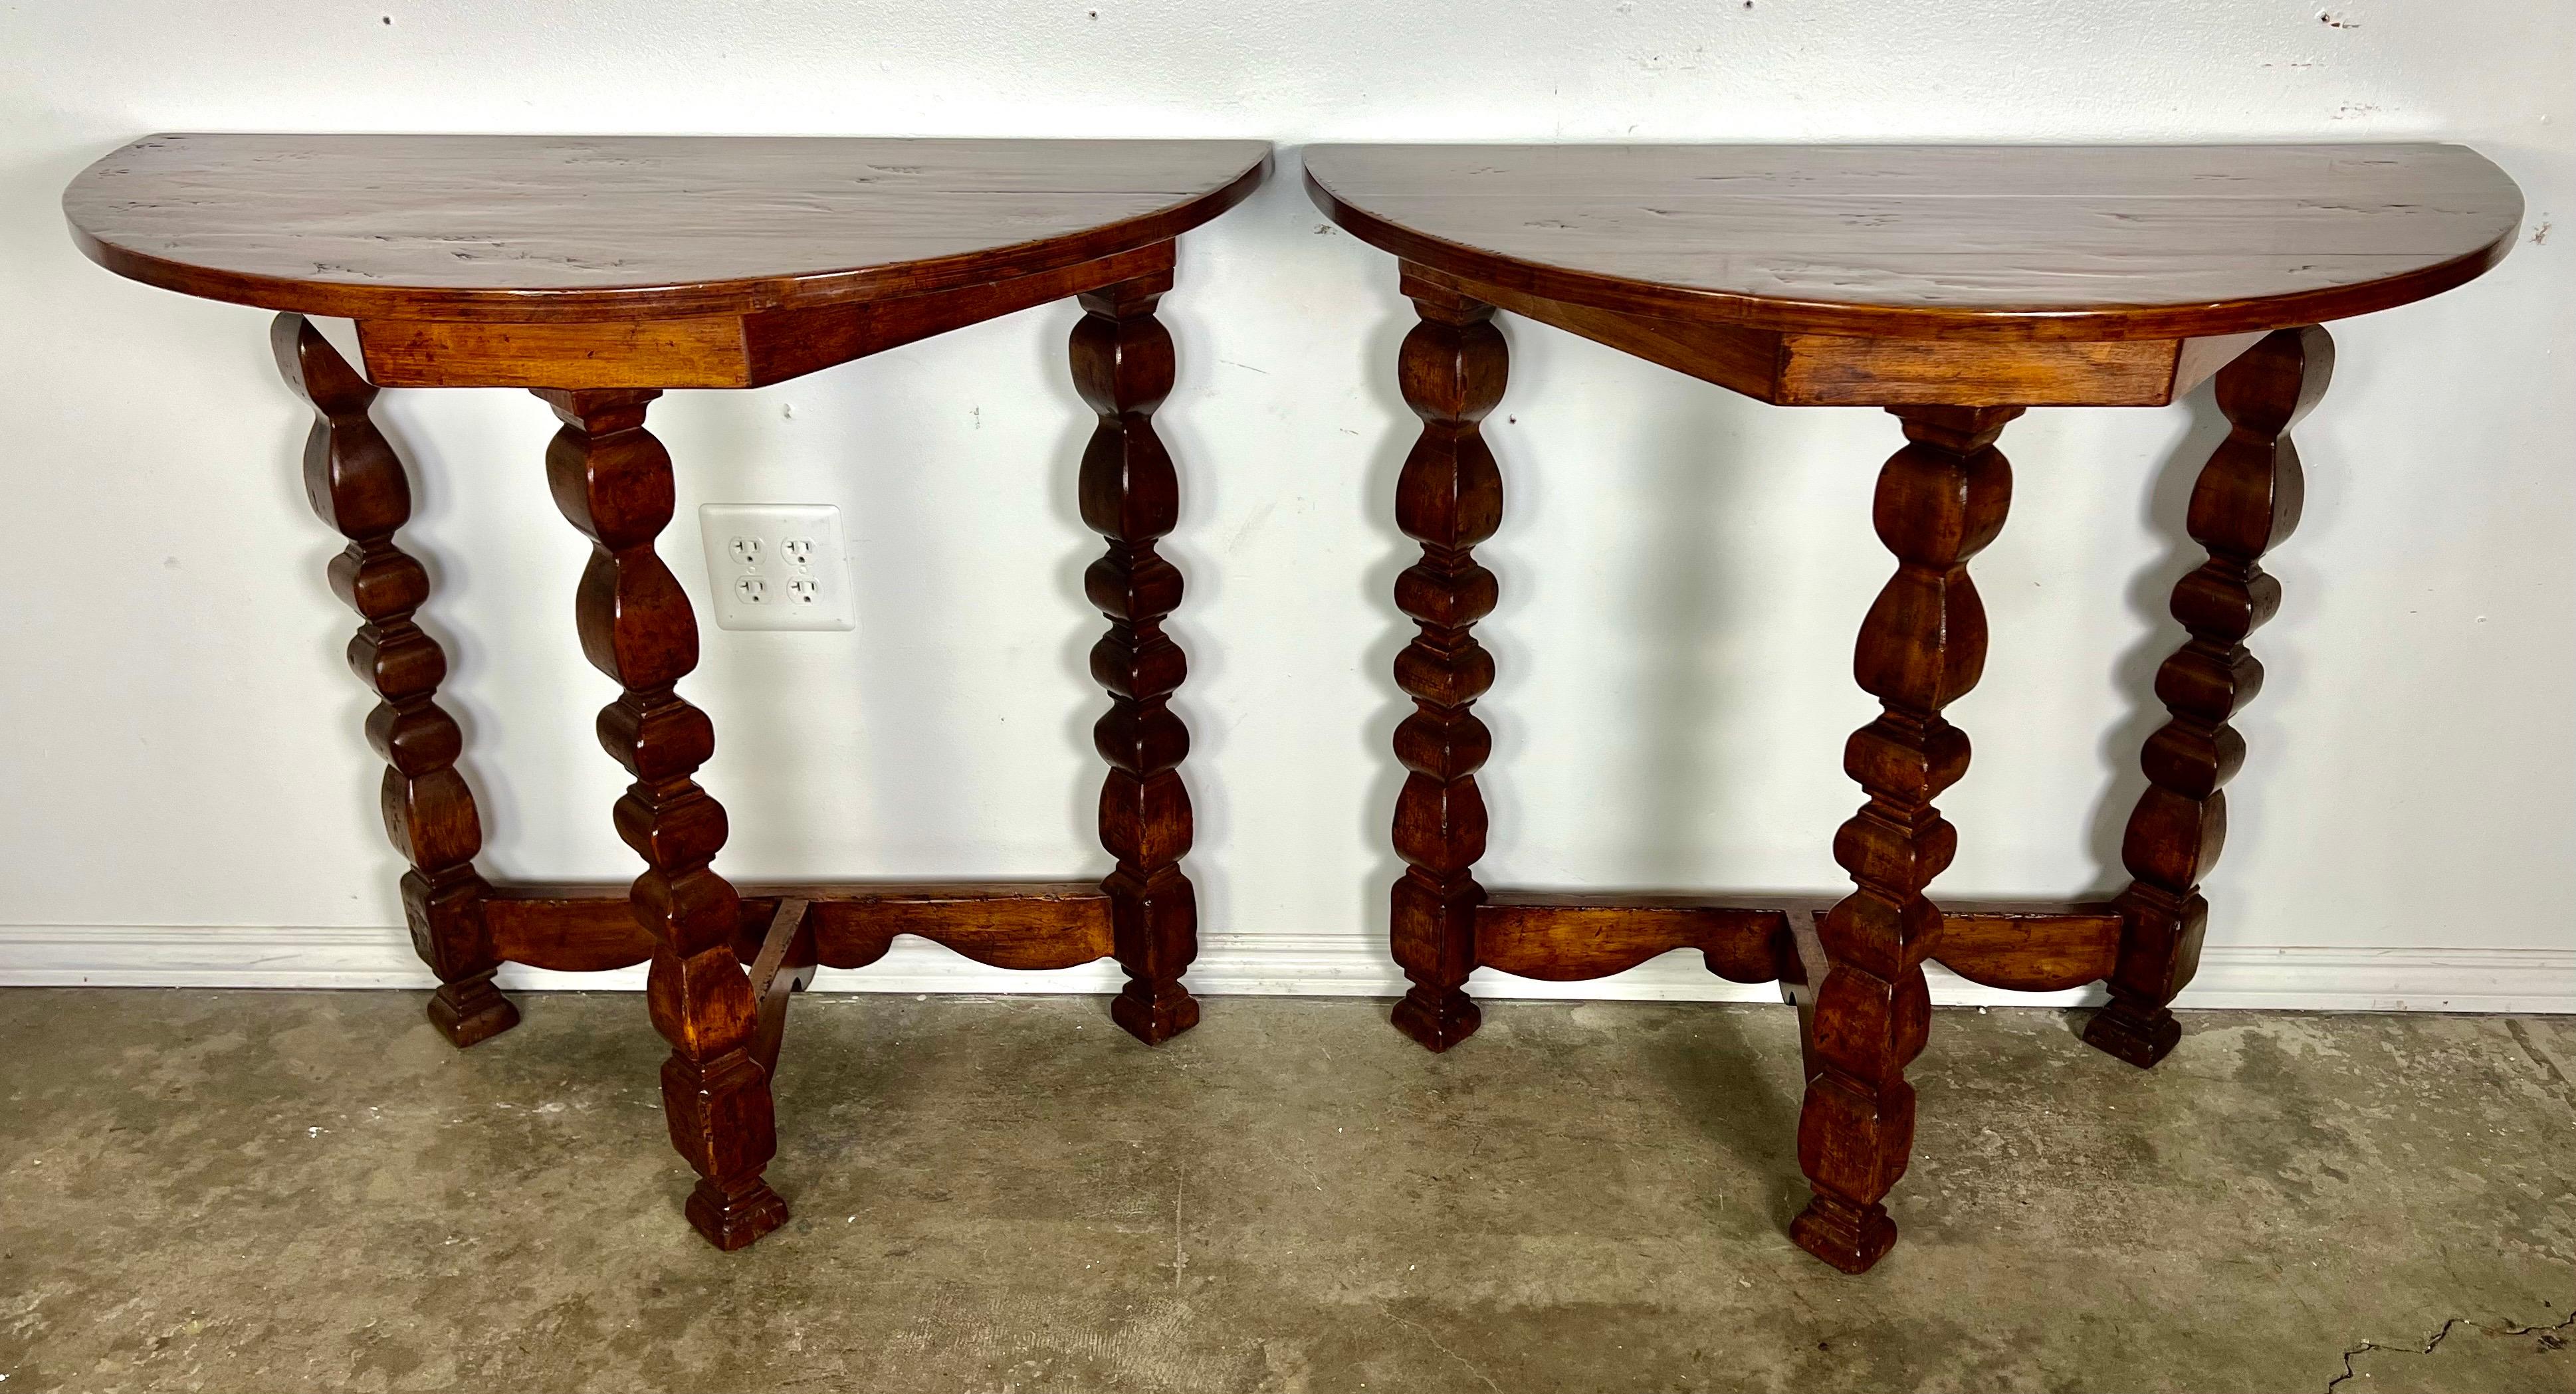 Pair of 1930's Italian demi-lune consoles with a distinctive design featuring turned spindle legs.  There is a bottom stretcher that connects the legs. The walnut has a rich tone and a beautiful patina.  